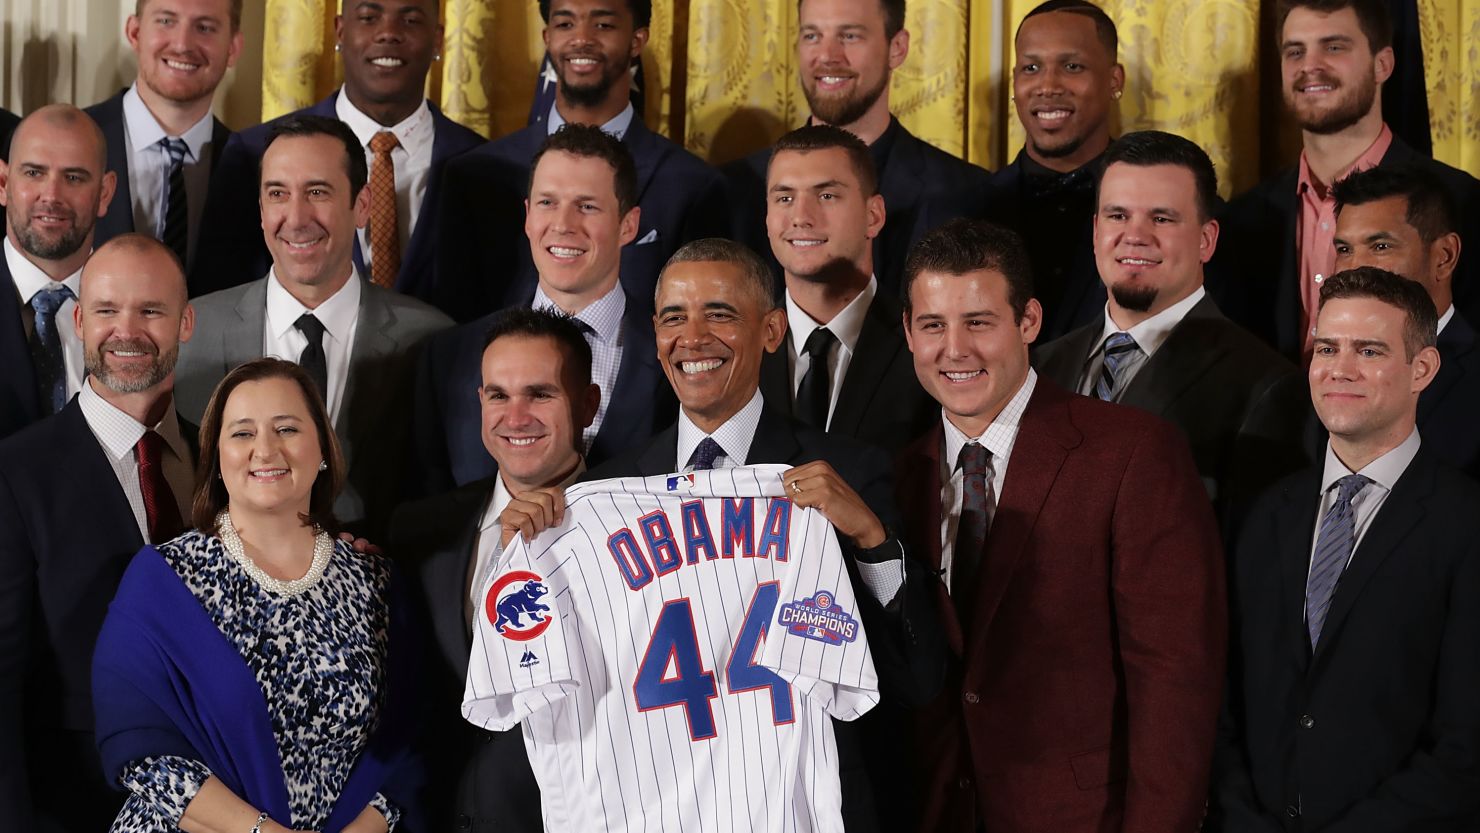 WASHINGTON, DC - JANUARY 16:  U.S. President Barack Obama poses for photograph with the Major League Baseball World Series champion Chicago Cubs during a celebration in the East Room of the White House January 16, 2017 in Washington, DC. Obama made sure to celebrate the Cubs' victory at the White House during his last week in office because they are from his adopted home town of Chicago.  (Photo by Chip Somodevilla/Getty Images)